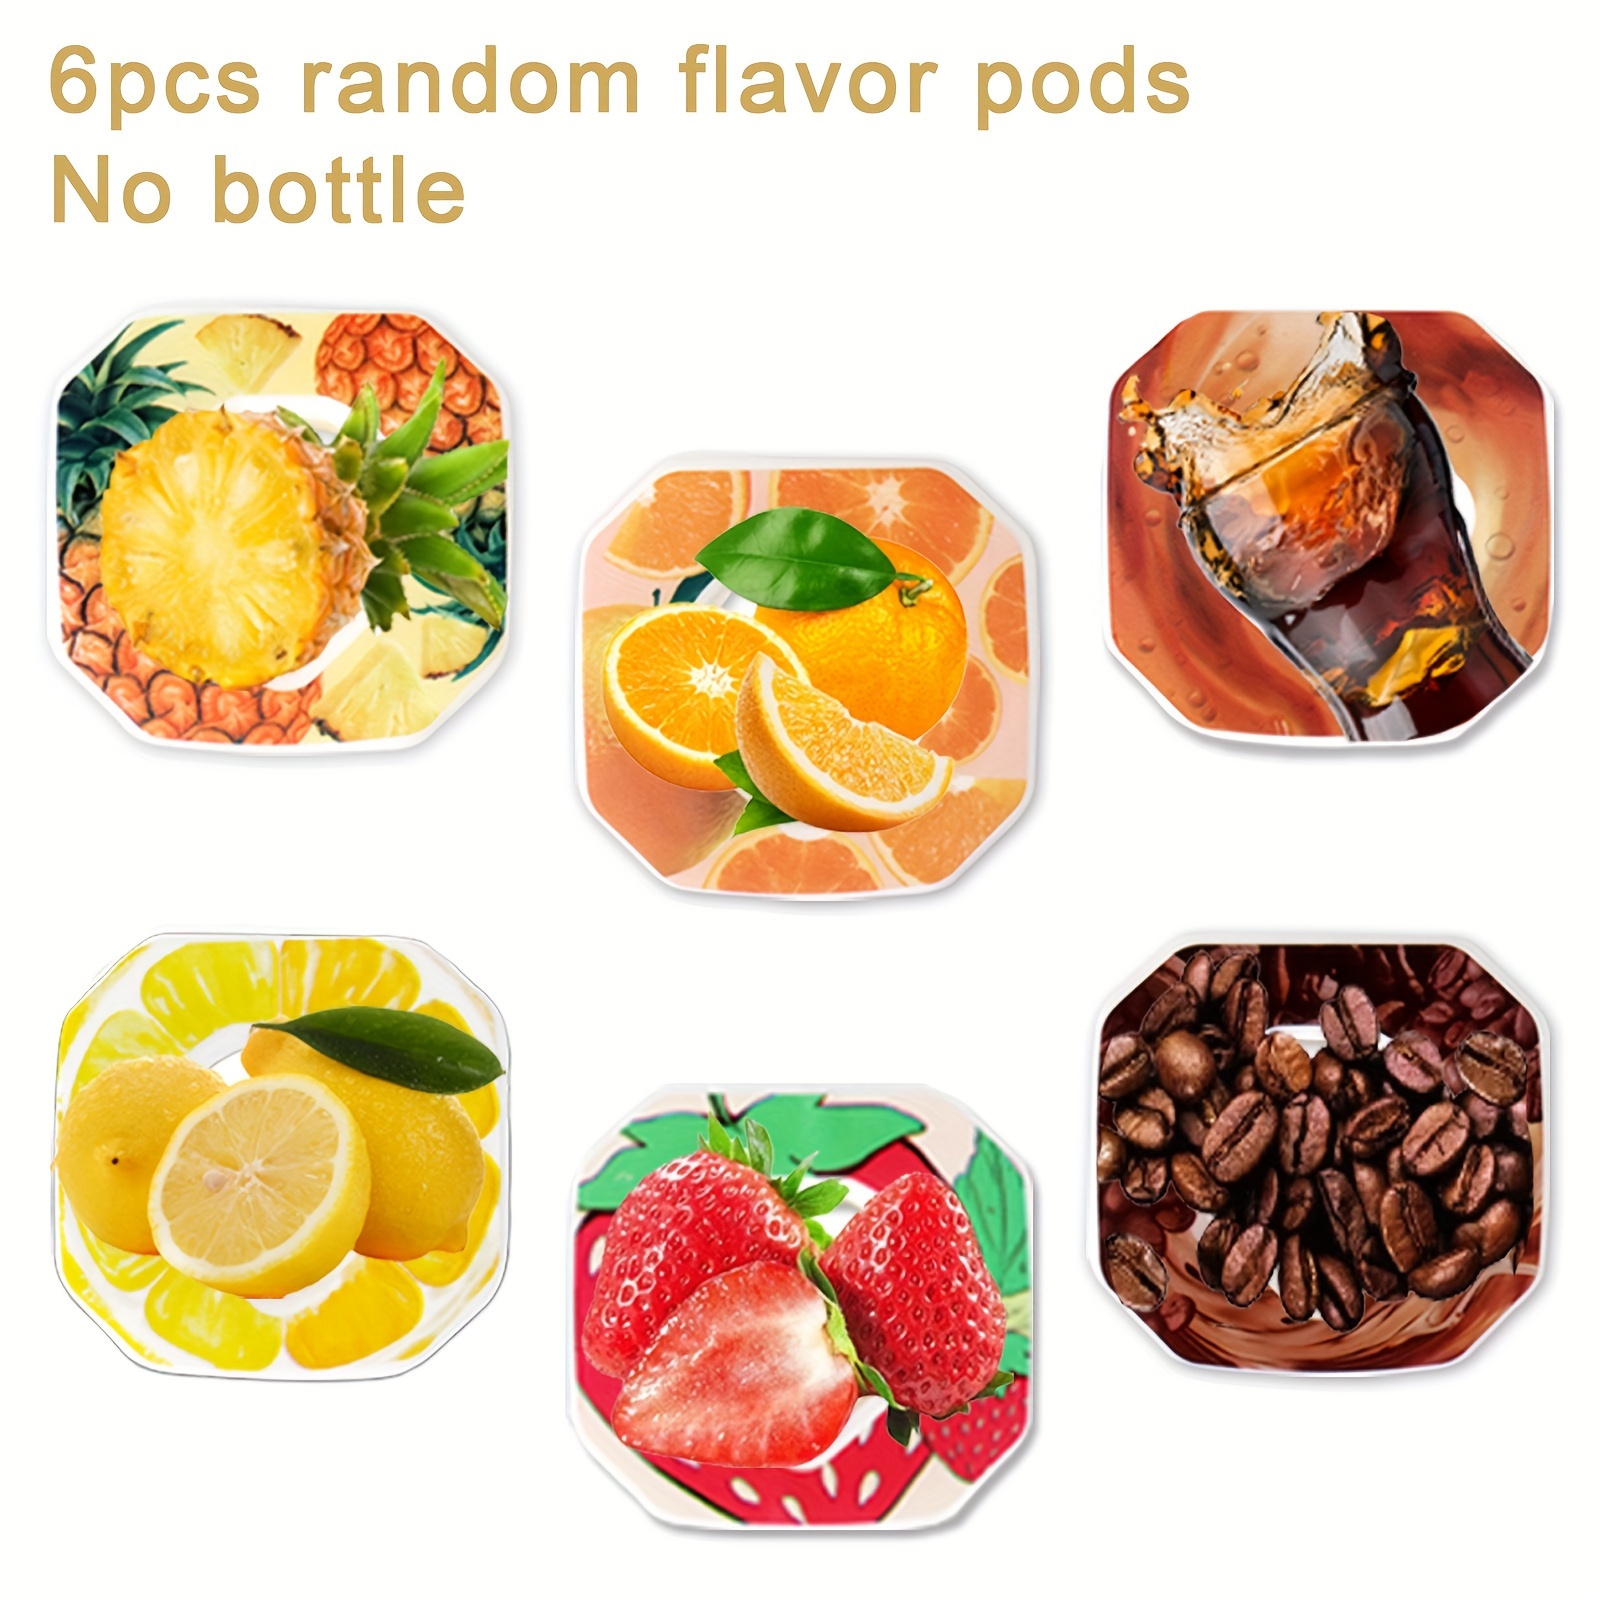 

6pcs Flavor Pods For Air Water Bottle, Scent Rings Water Bottles Accessory, 0% Sugar 0% Calories Fruit Fragrance Pods For Daily Exercise Boost Drinking Water